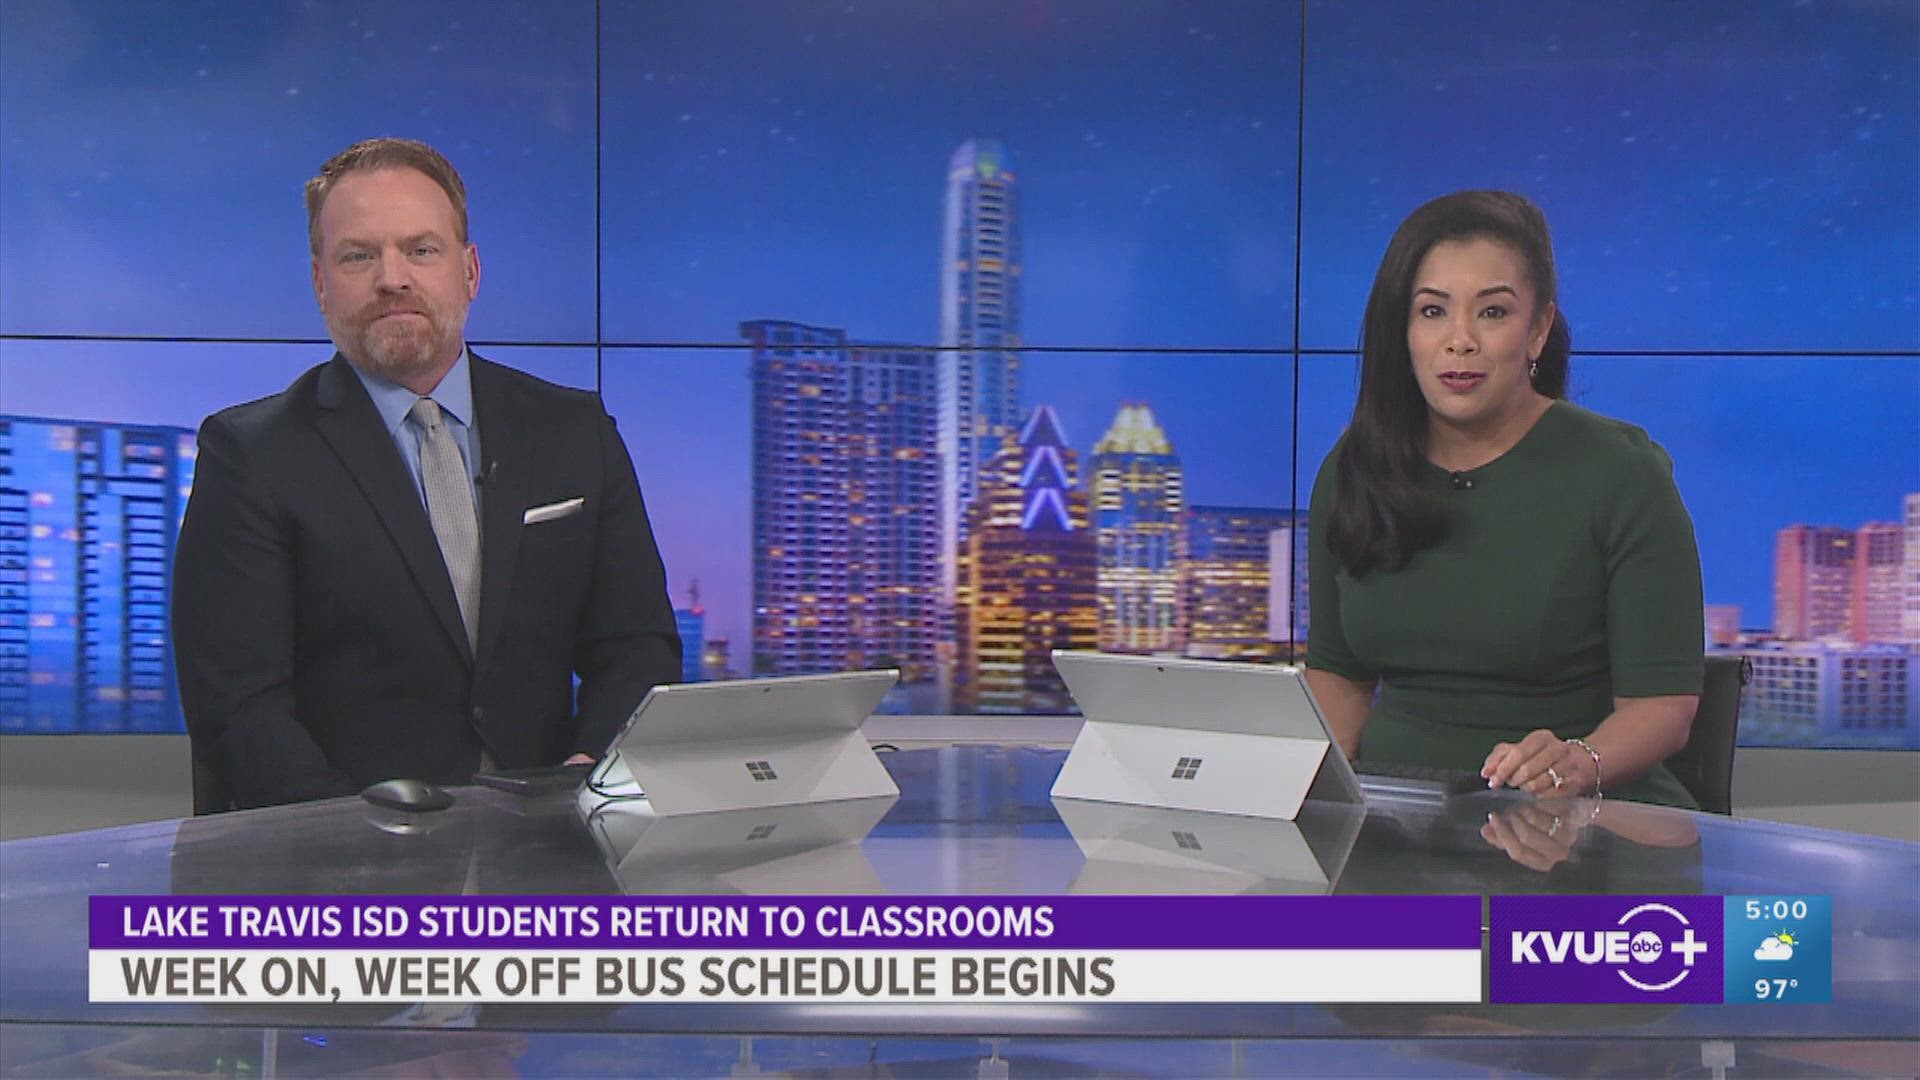 Families in the school district are adjusting to a new bus schedule.